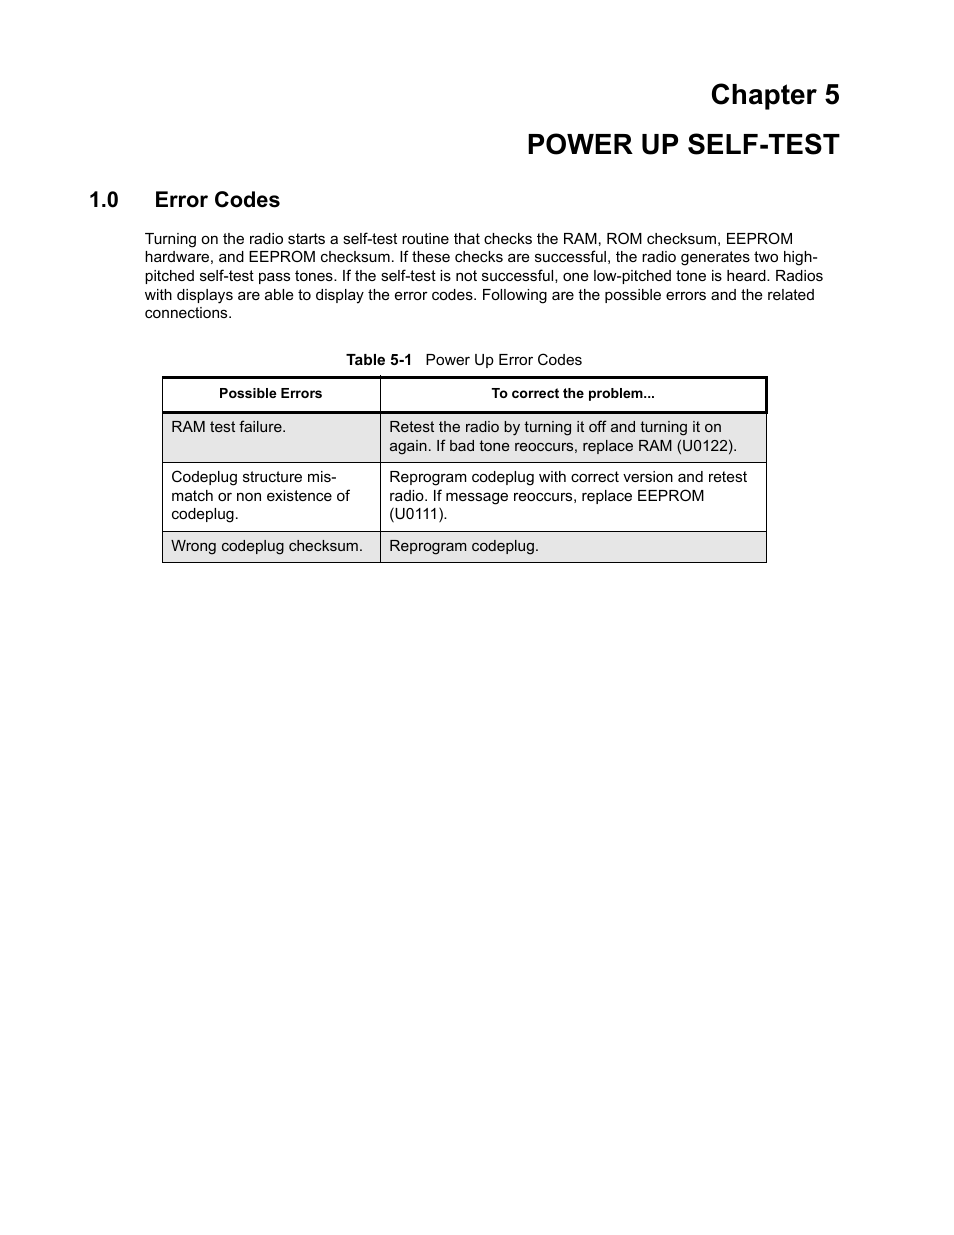 Chapter 5 power up self test, 0 error codes, Chapter 5 power up self-test | Nikon RADIUS CM200 User Manual | Page 47 / 70